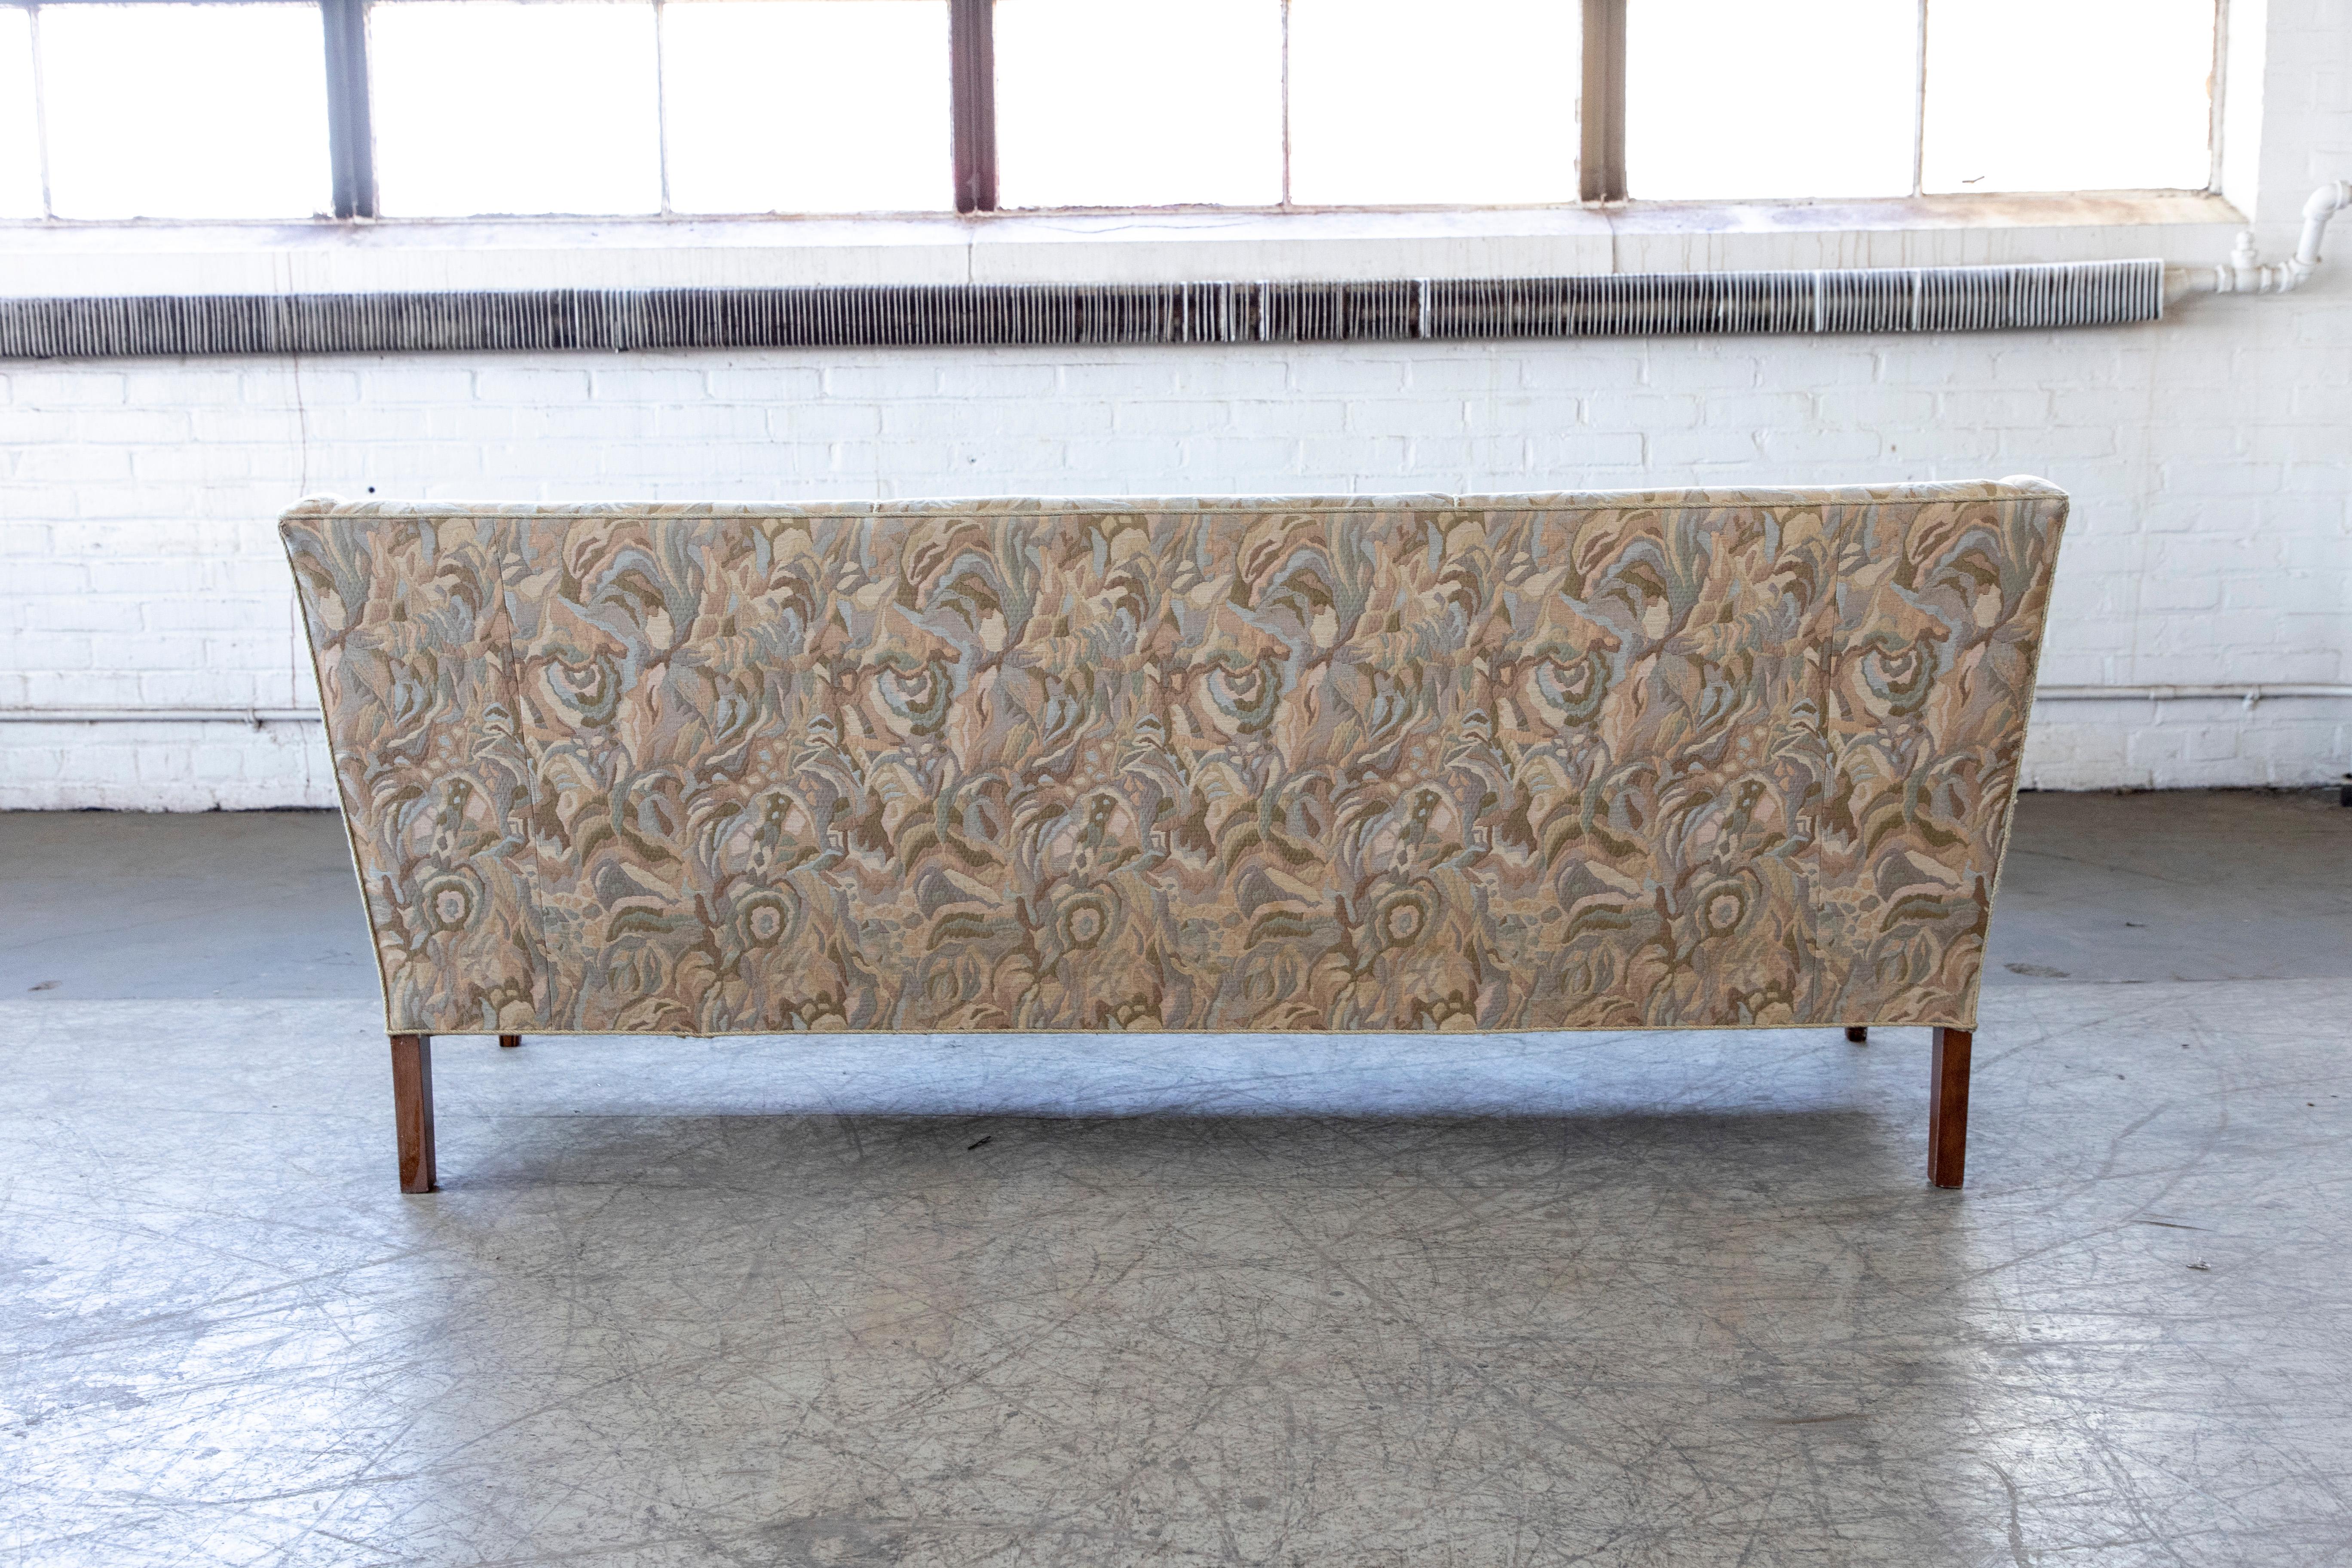 Classic Danish Midcentury Three-seat Sofa by Frits Henningsen 1950's For Sale 2